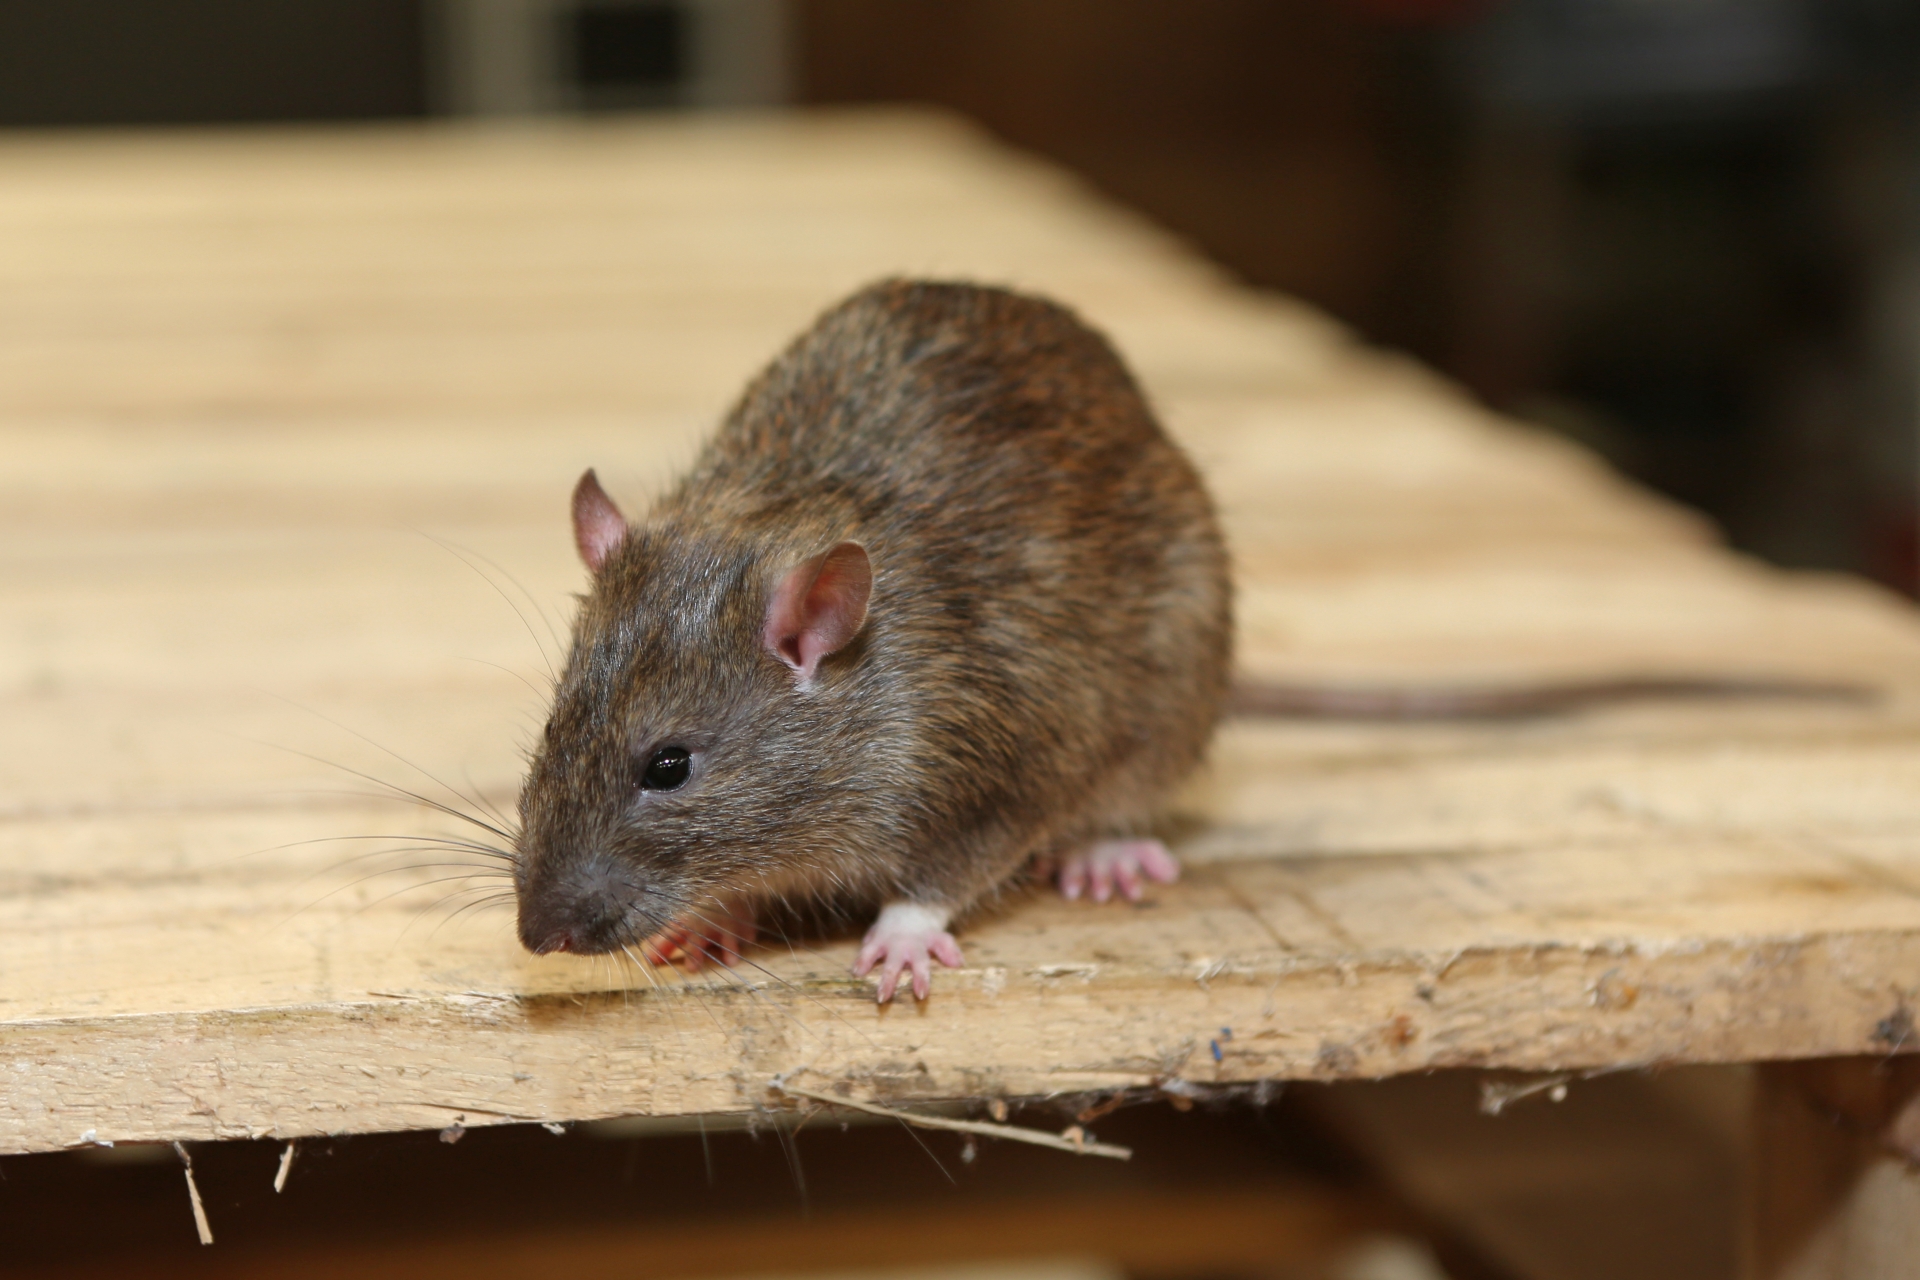 Rat extermination, Pest Control in Muswell Hill, N10. Call Now 020 8166 9746